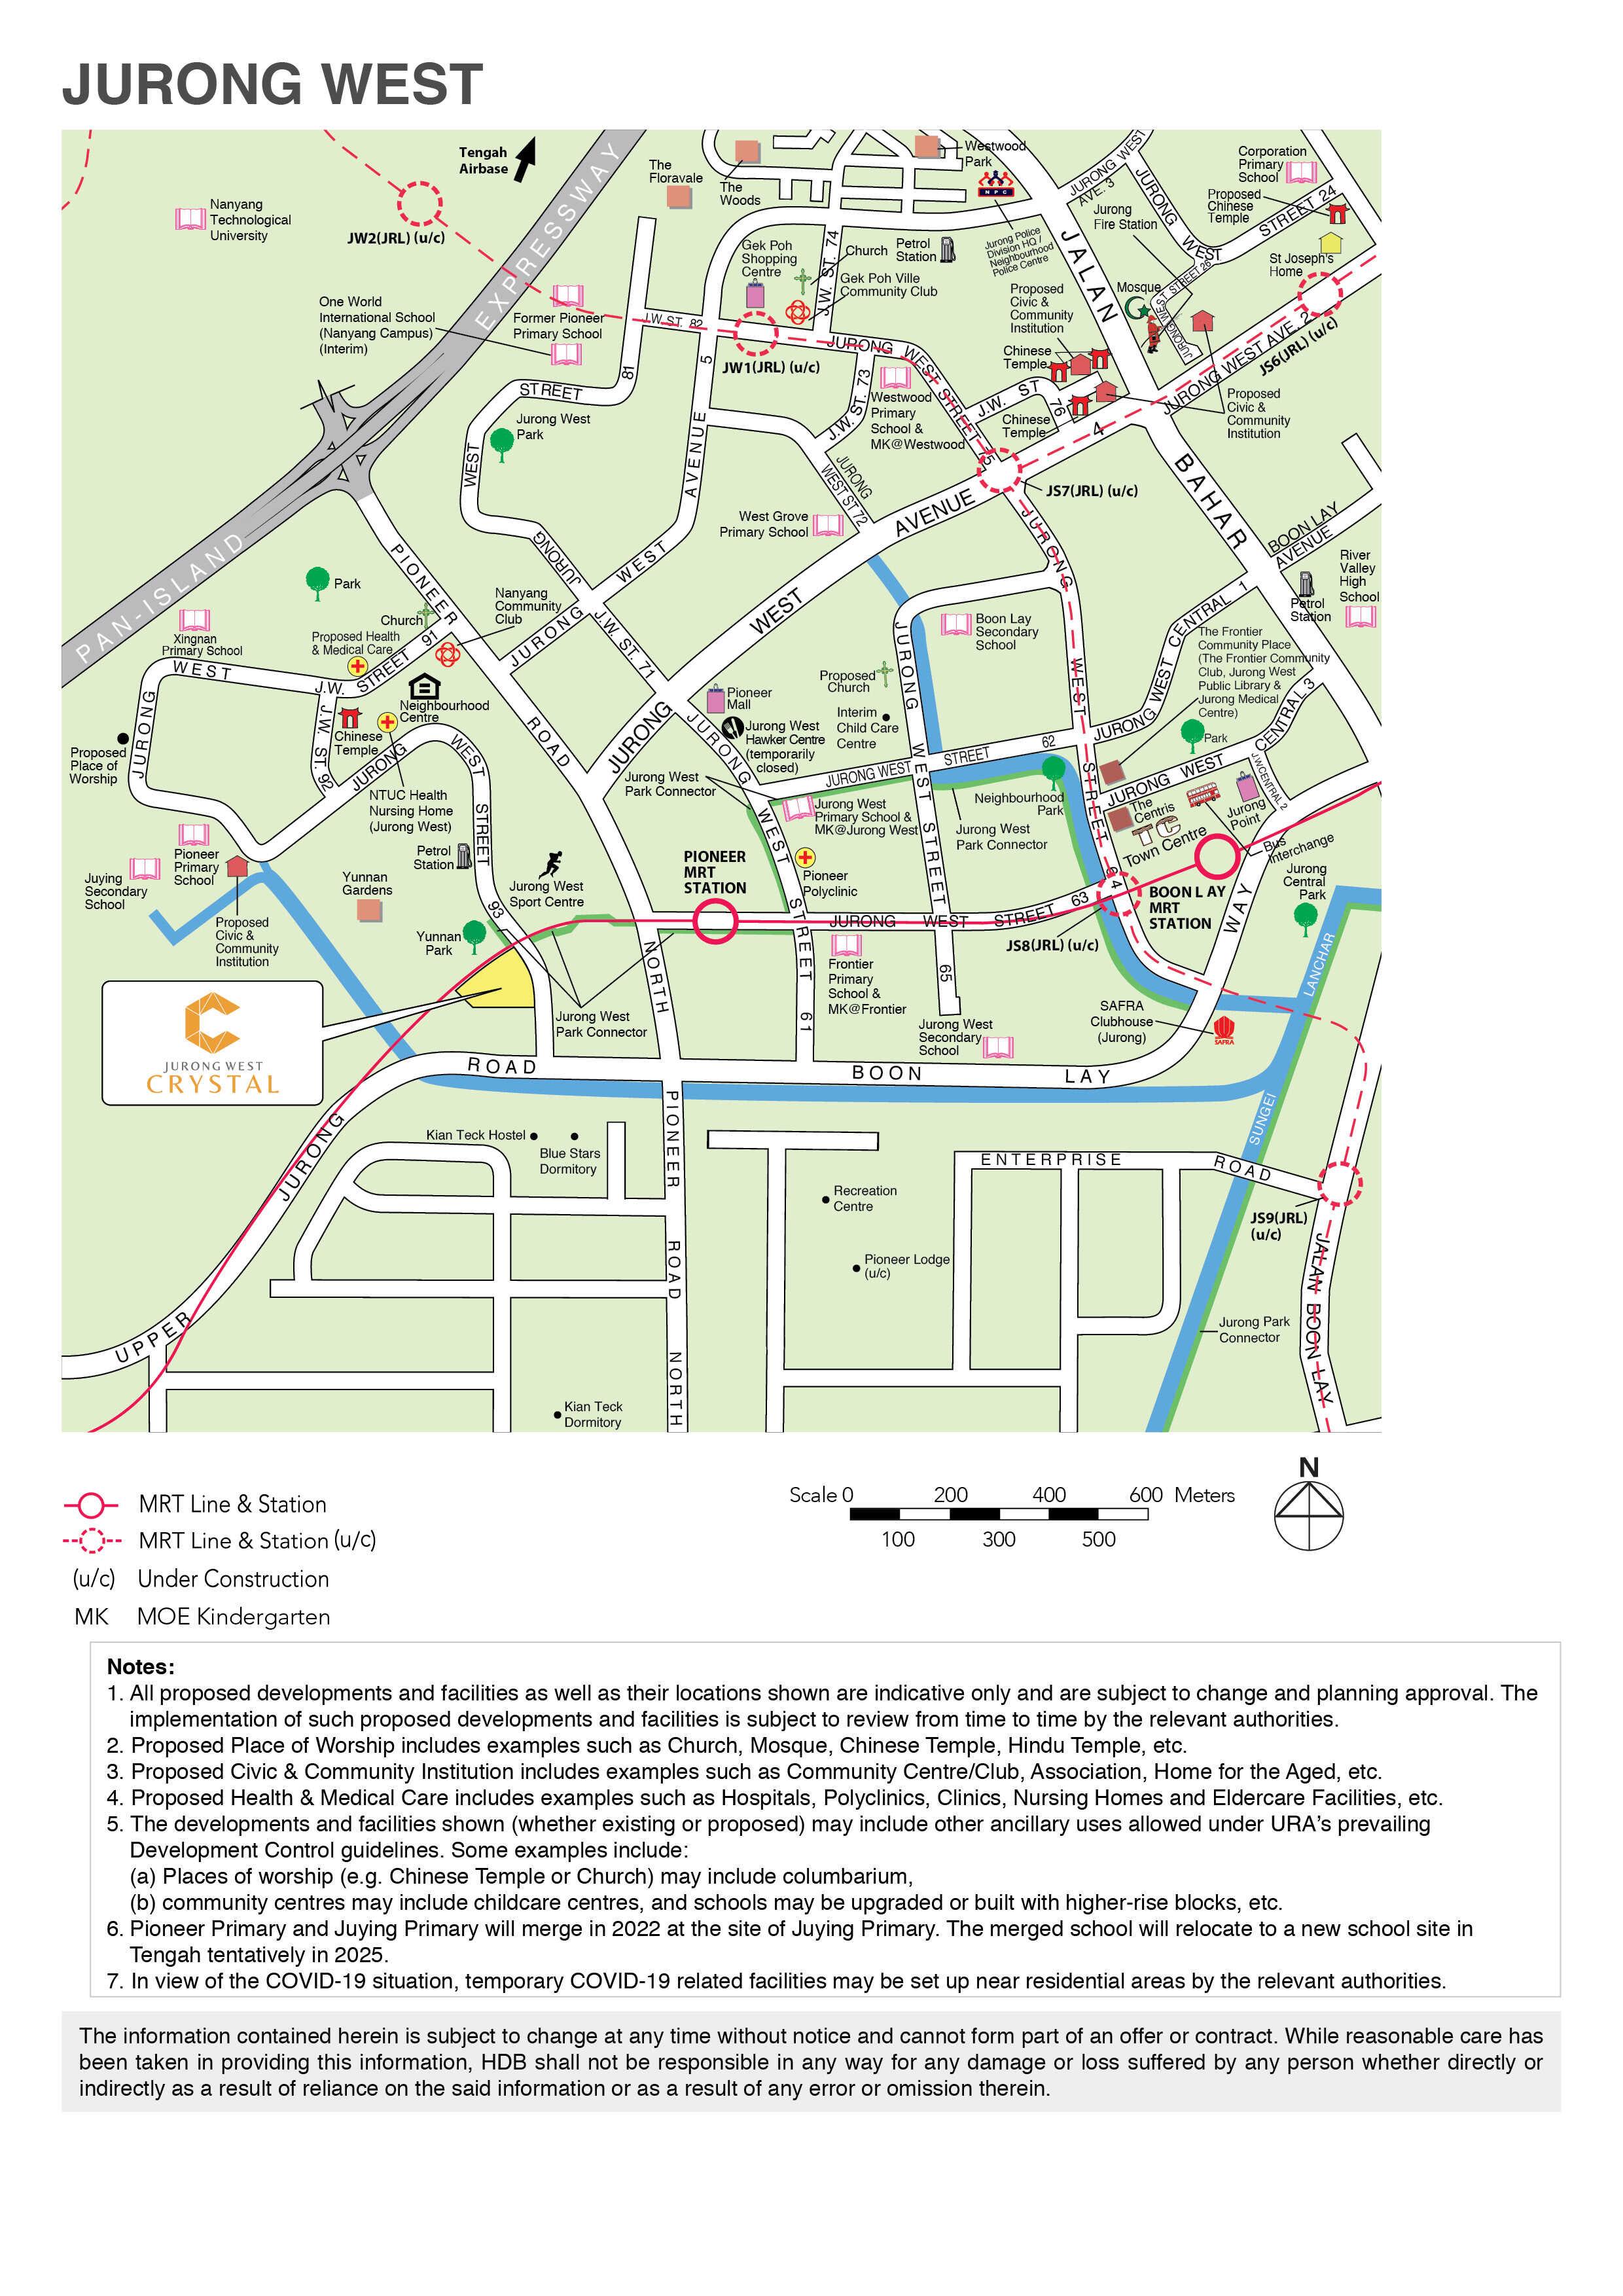 Jurong West Crystal Location Plan